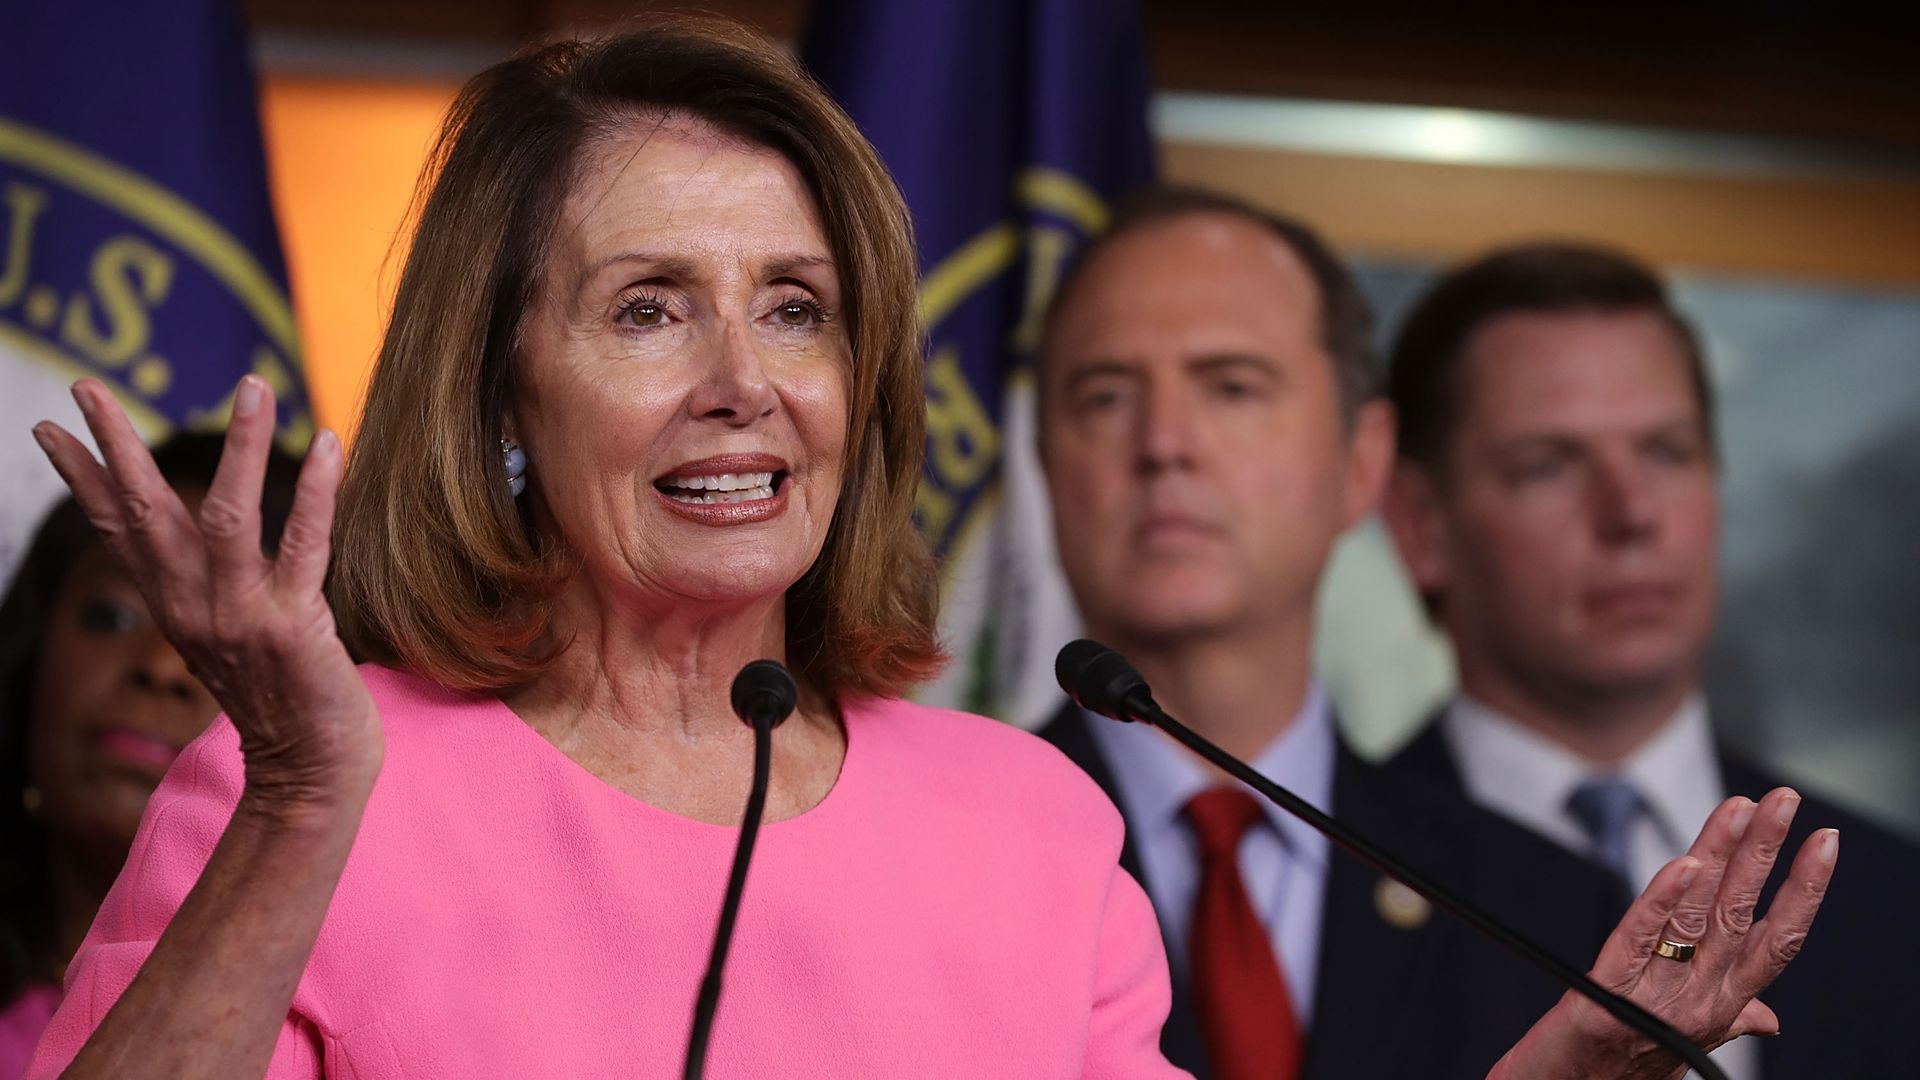 Nancy Pelosi in pink standing in front of Democrats raises her arms in a shrug smiling.